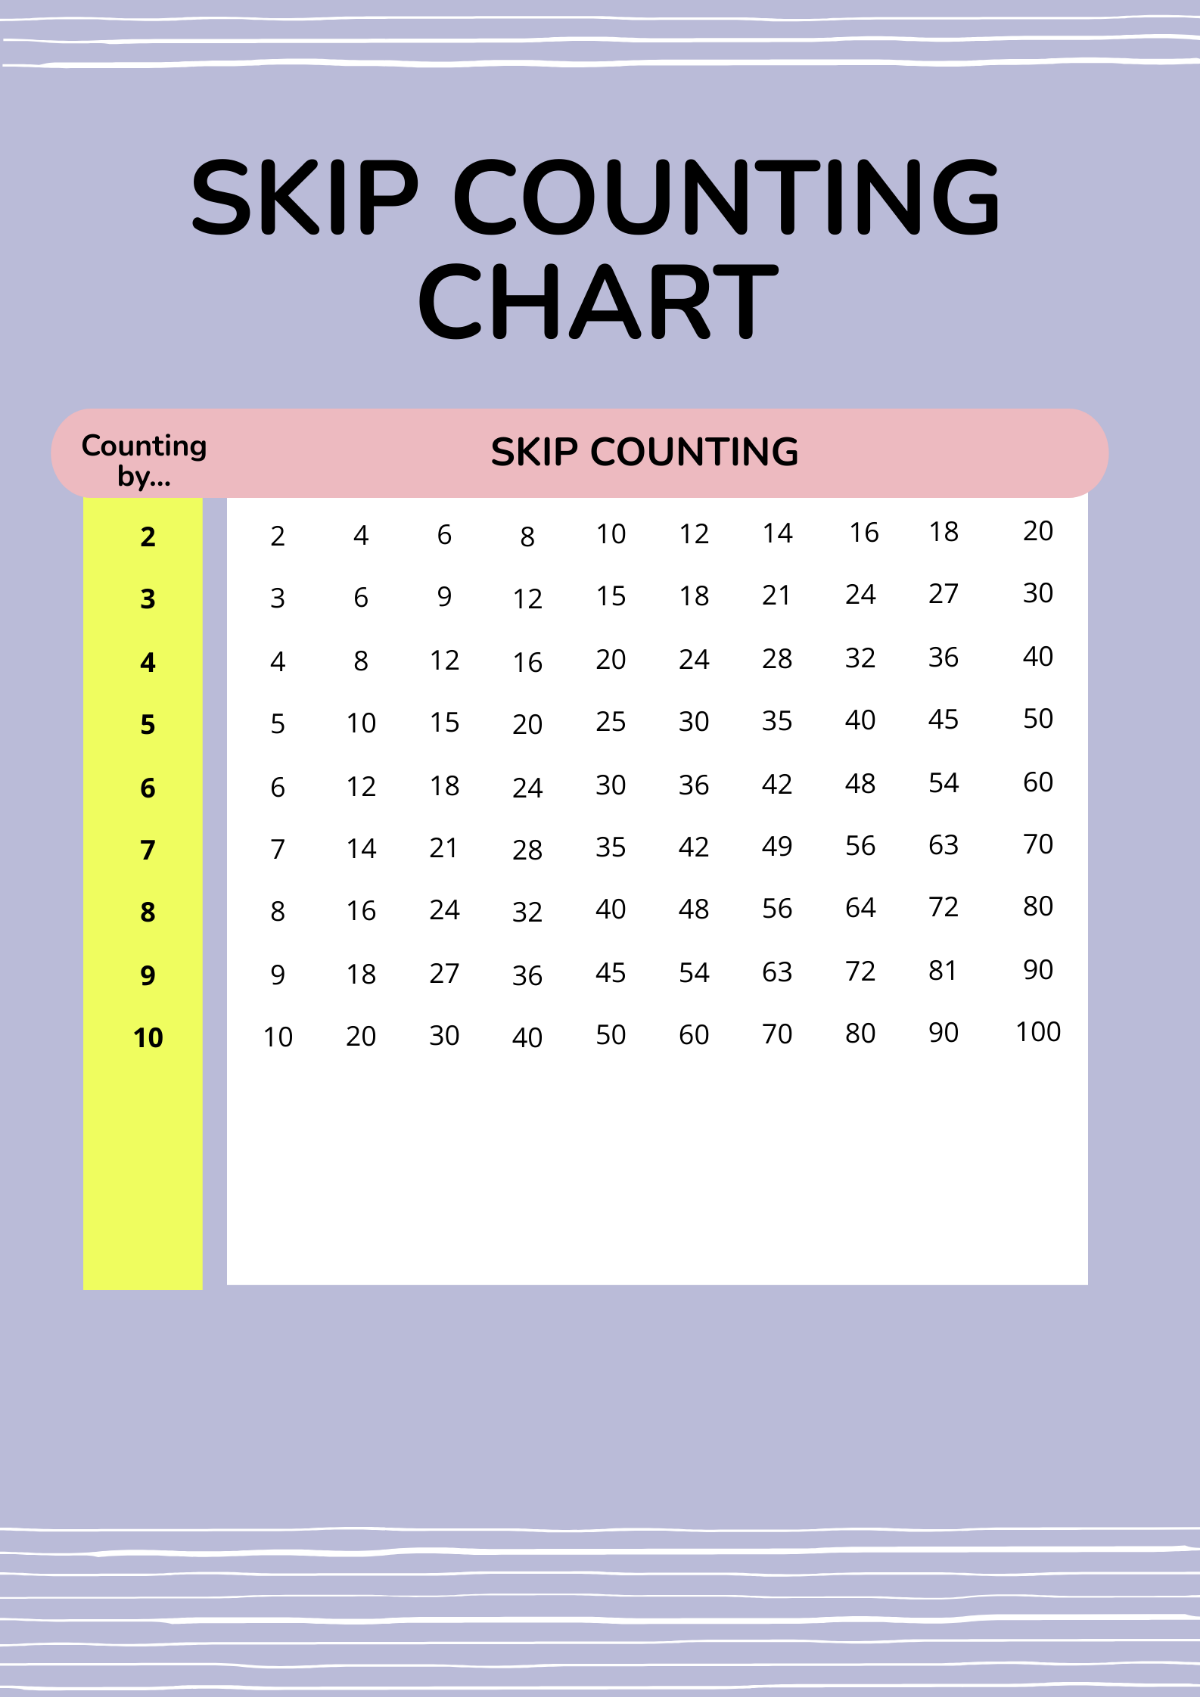 Skip Counting Chart Template